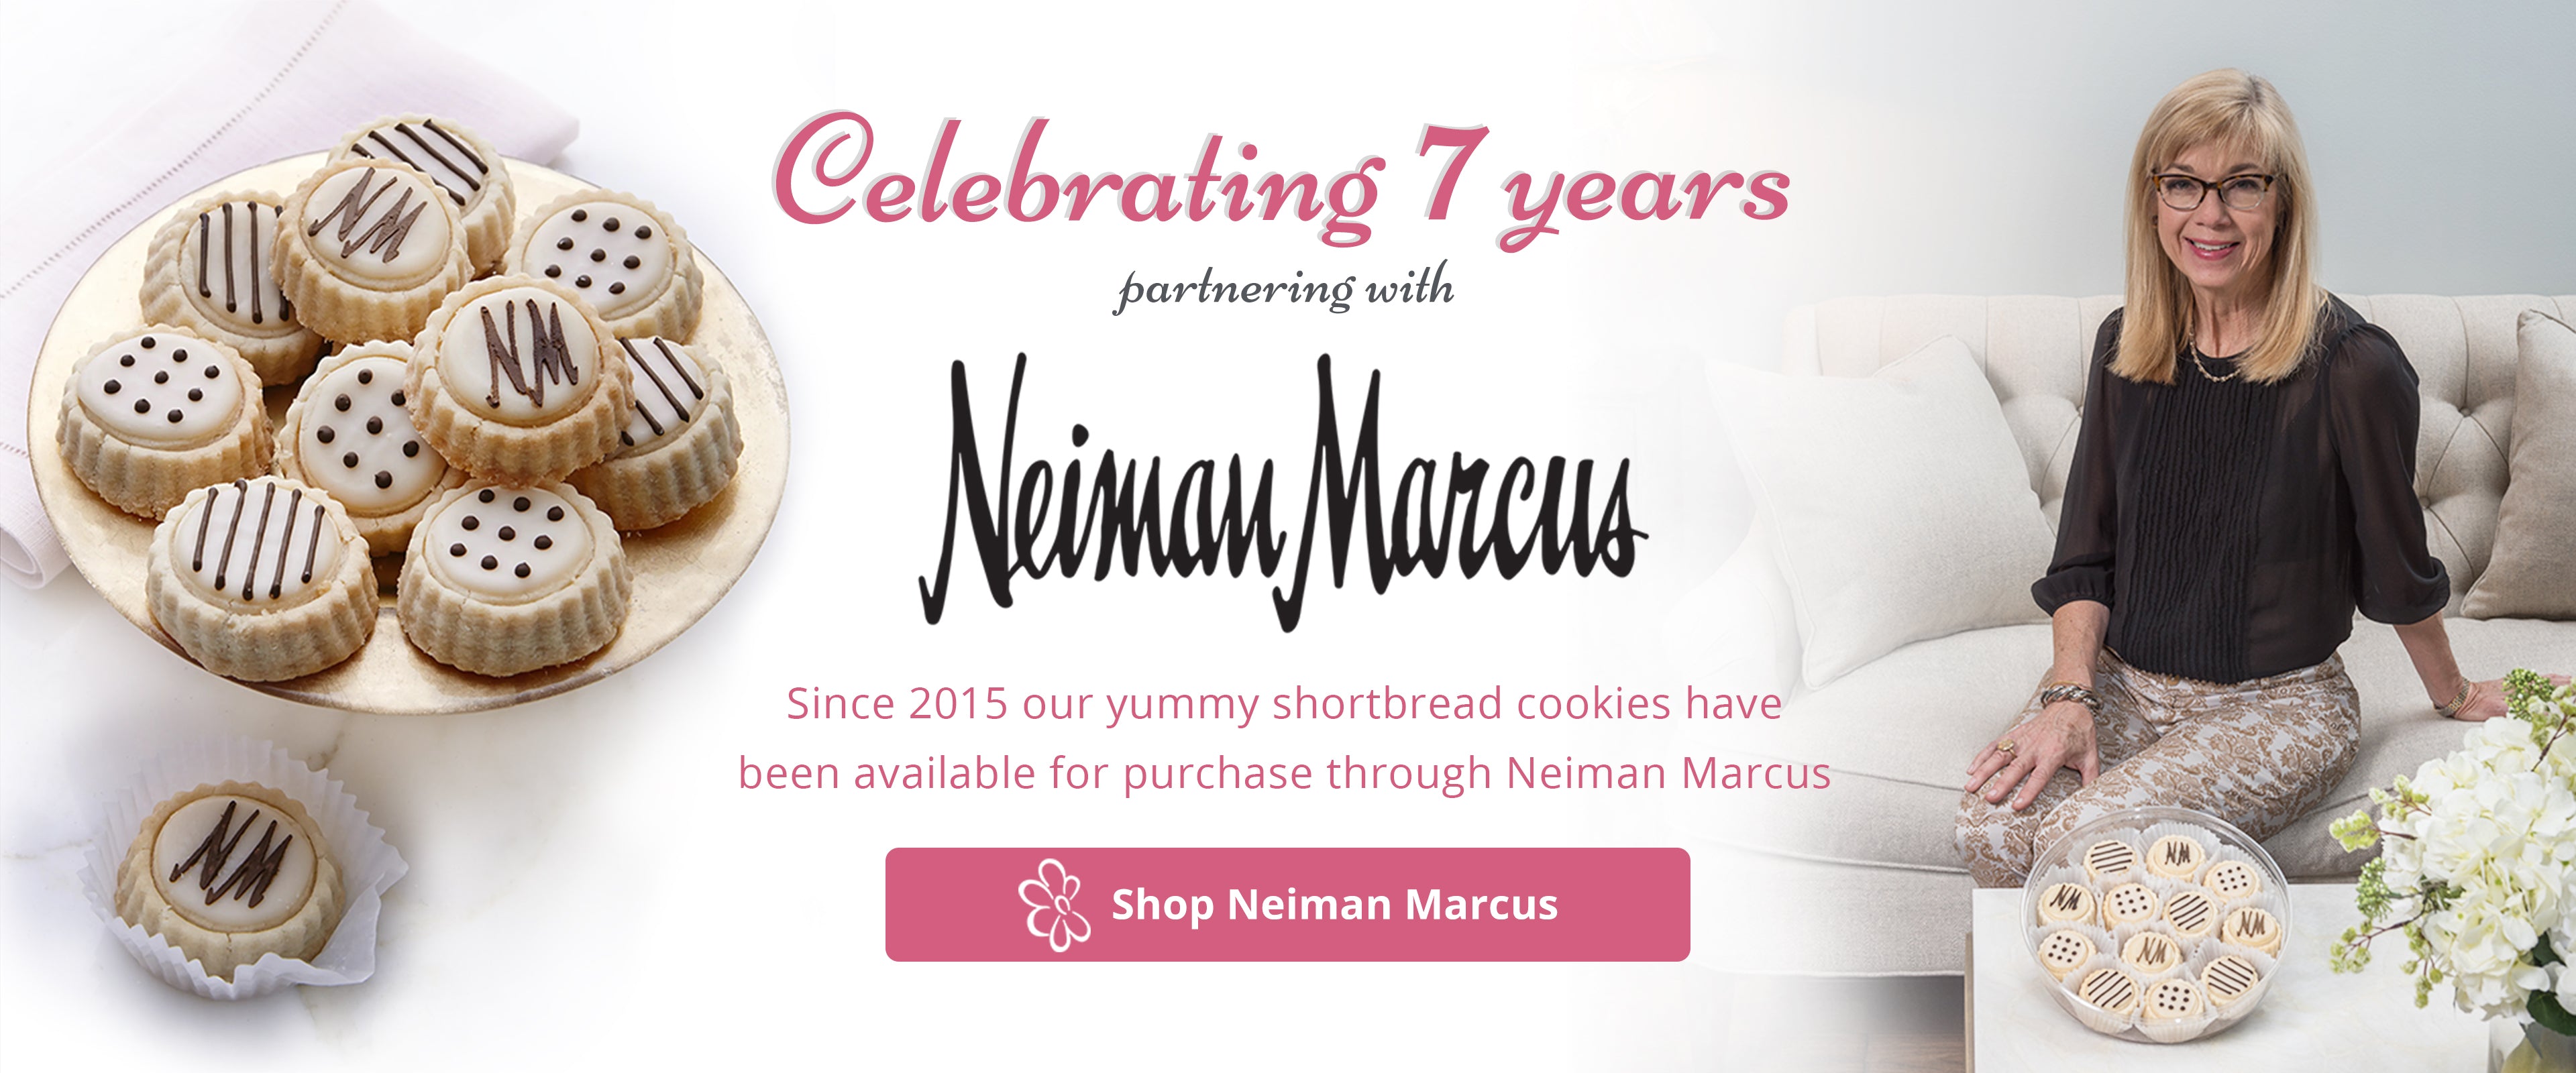 Celebrating 7 years partnering with Neiman Marcus